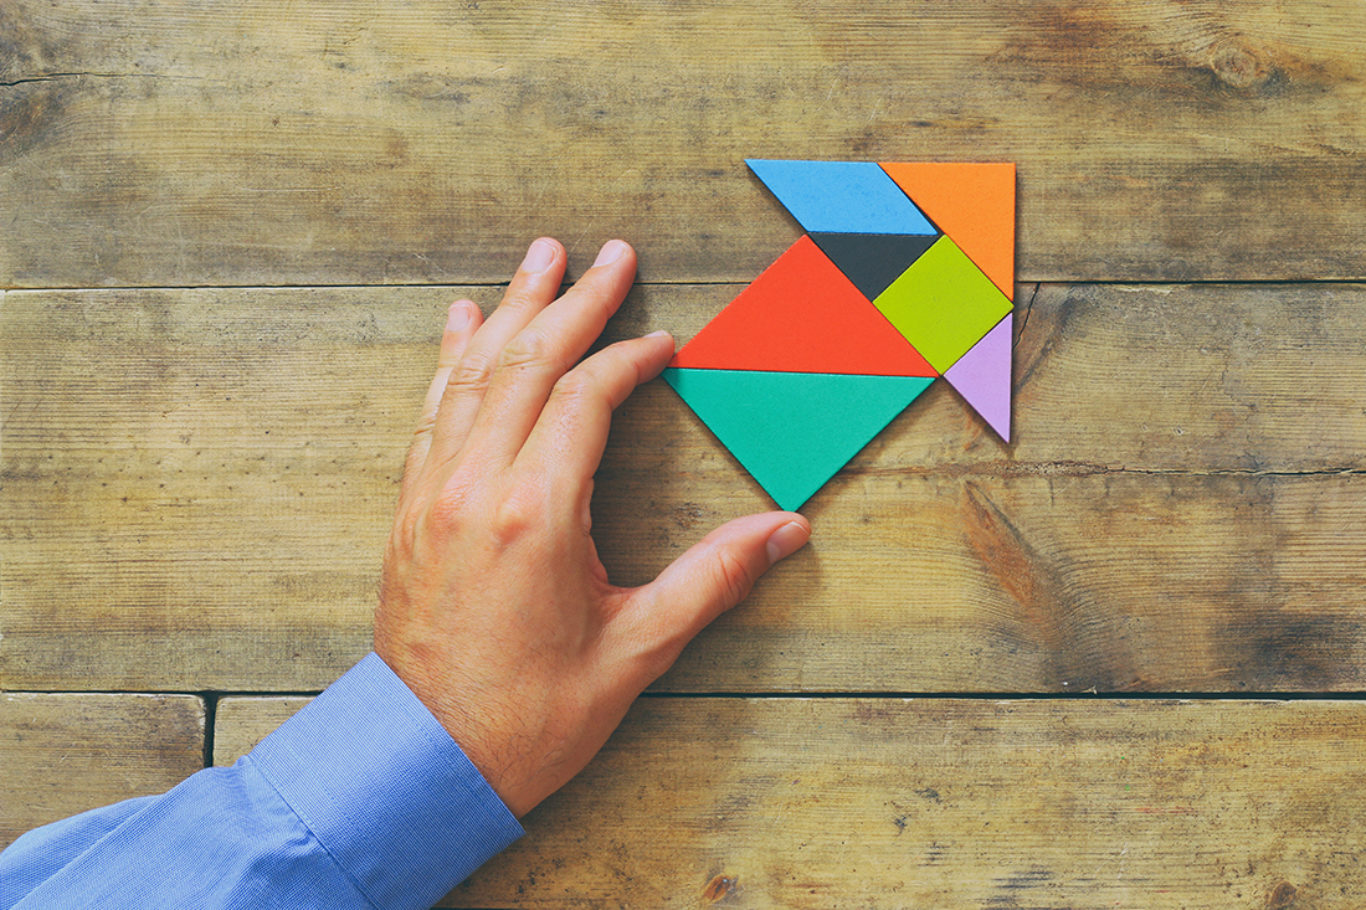 man's hand pointing at arrow made from square tangram puzzle, wooden background